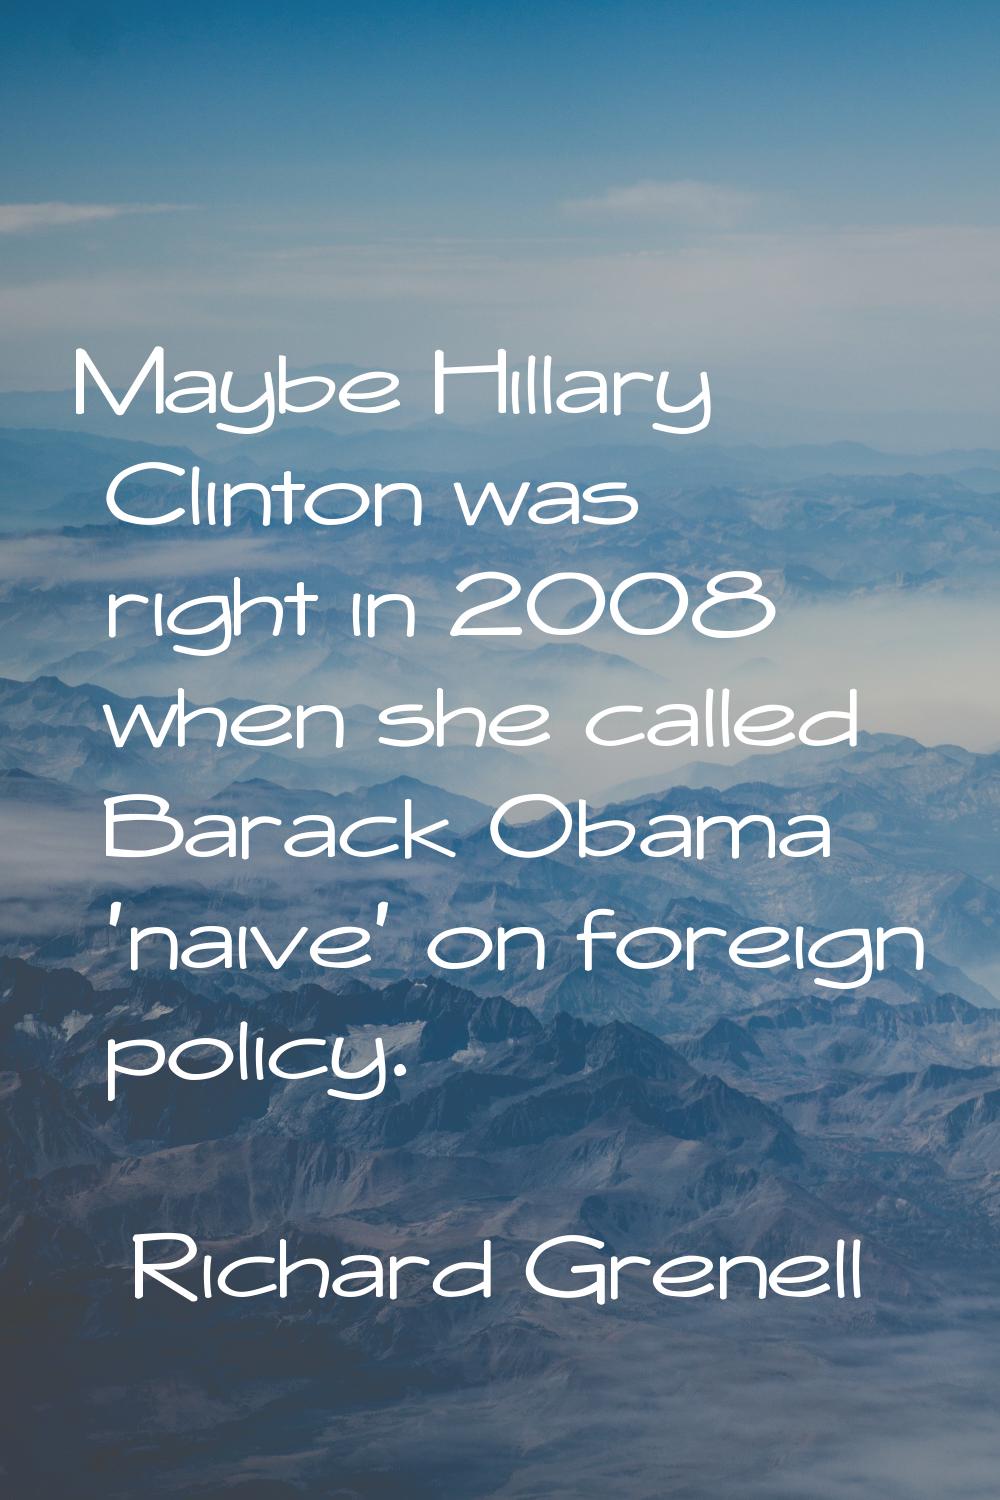 Maybe Hillary Clinton was right in 2008 when she called Barack Obama 'naive' on foreign policy.